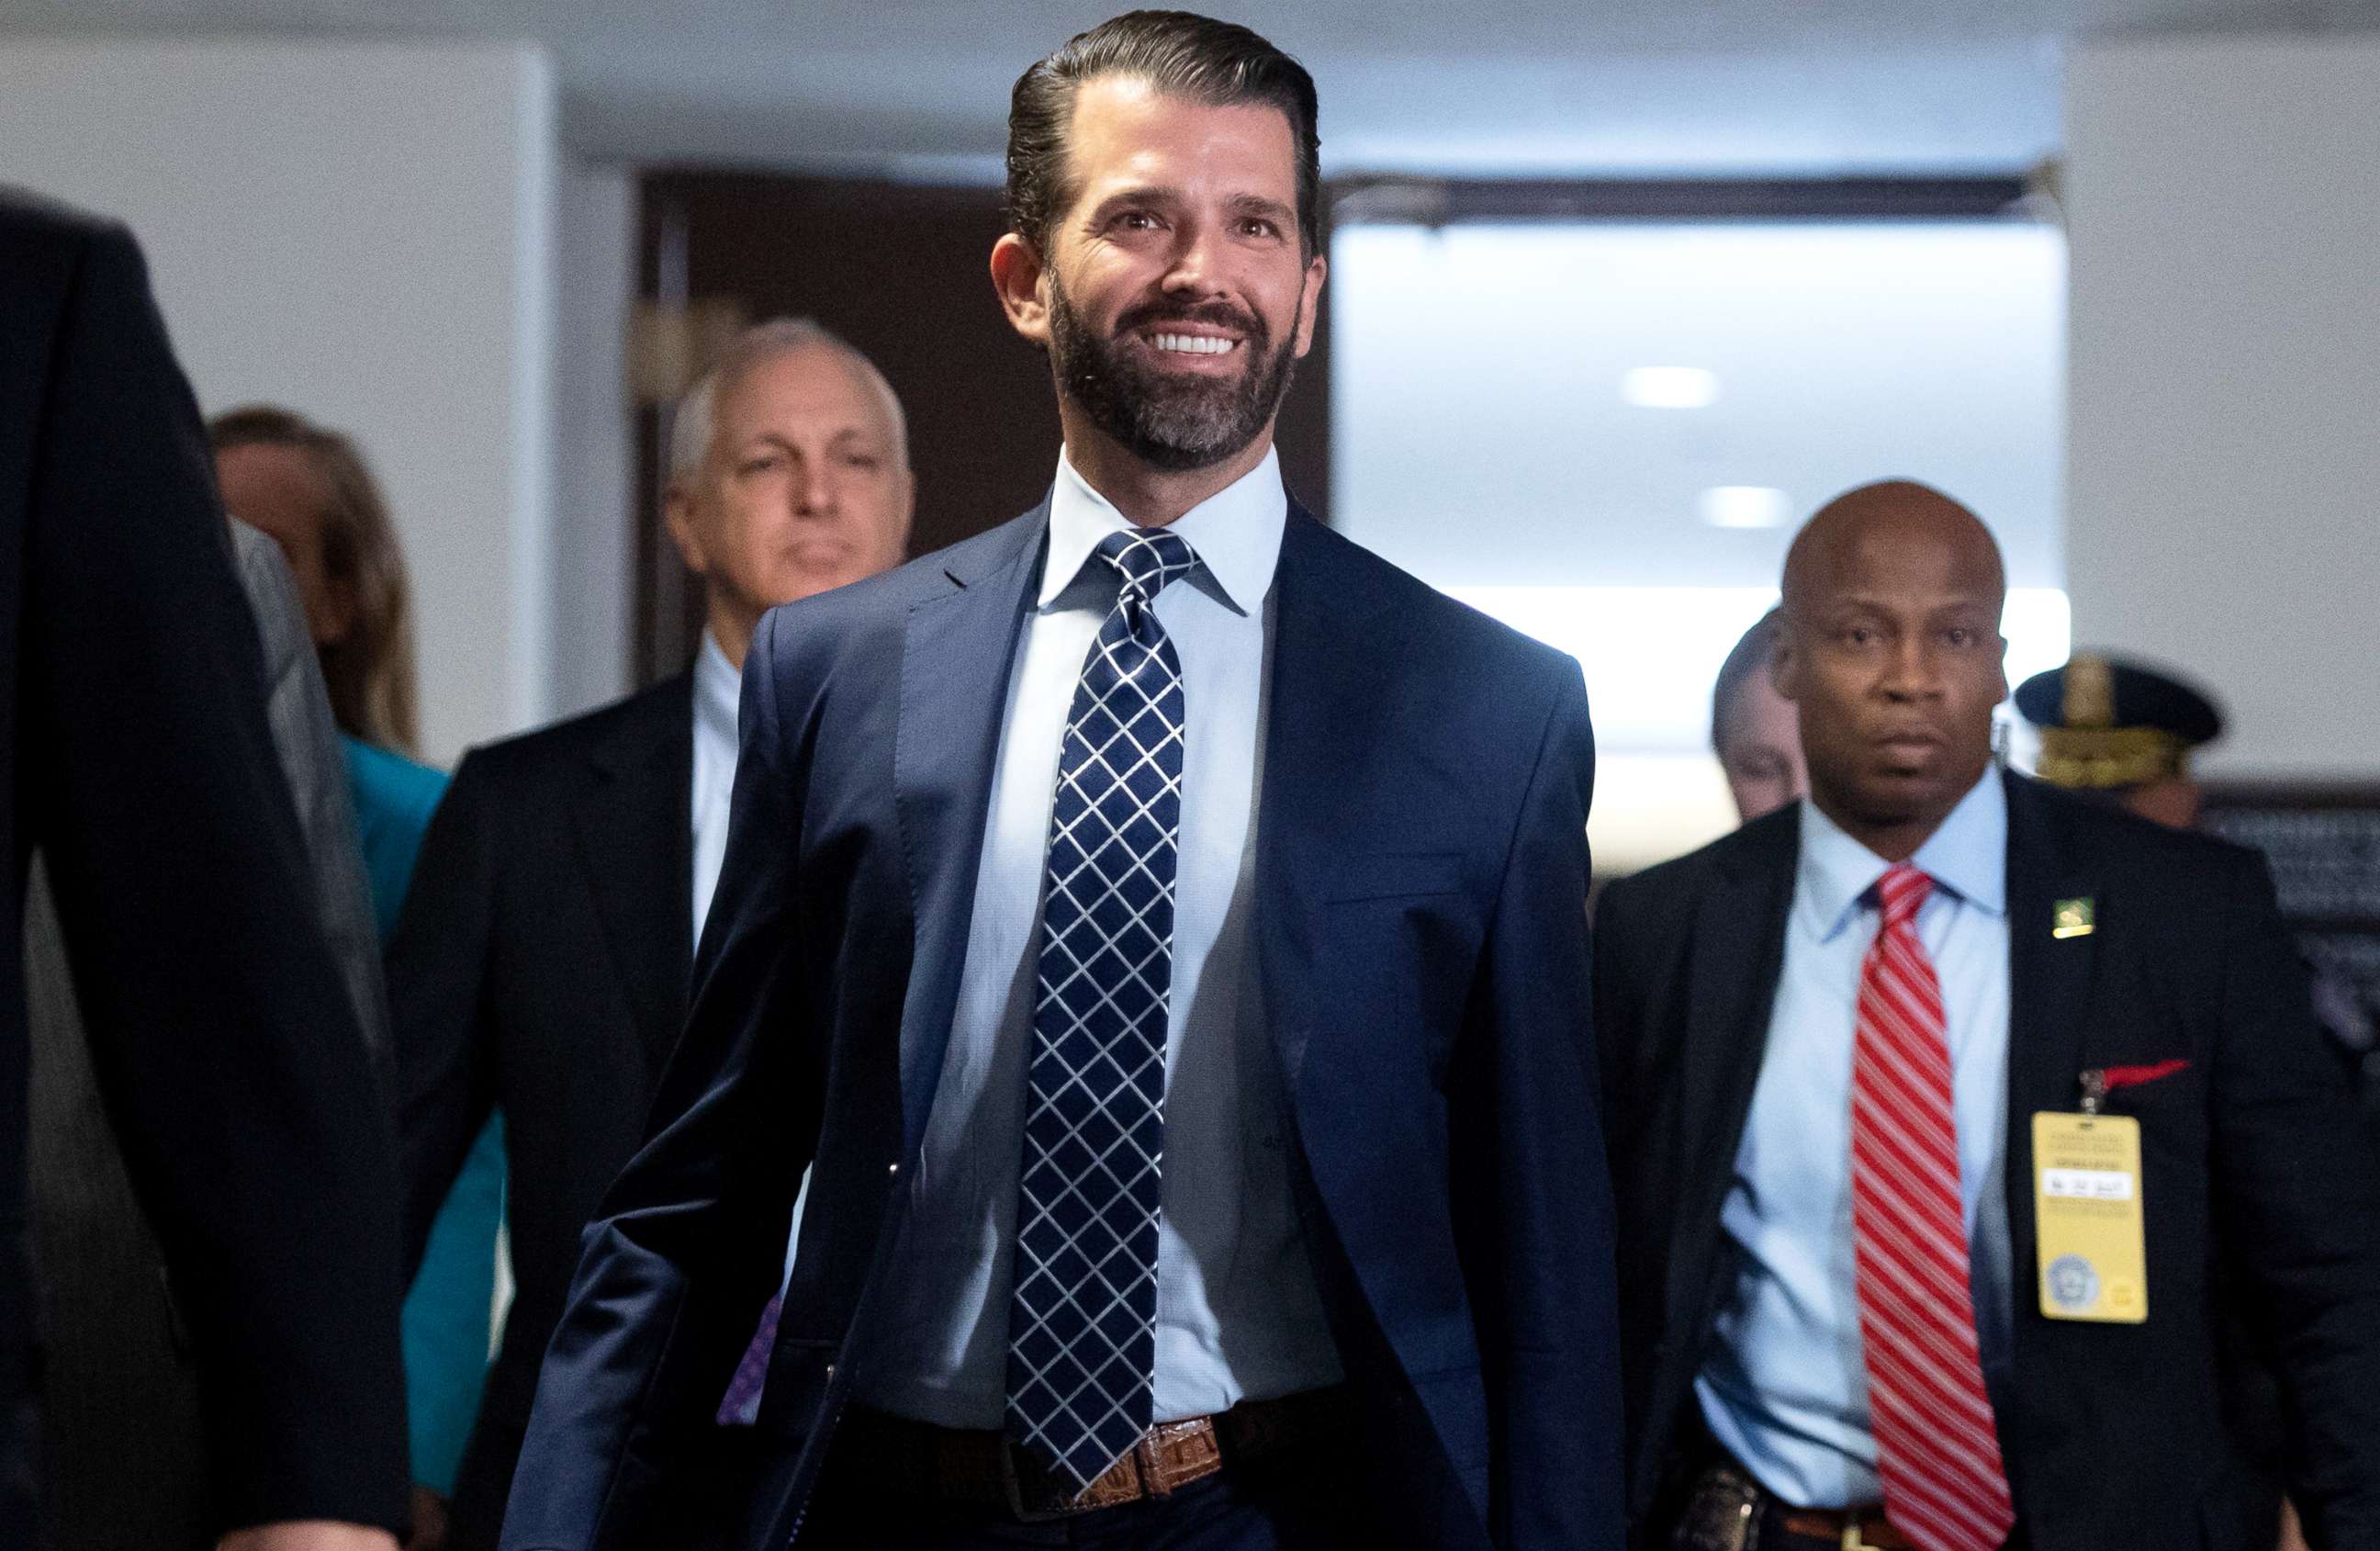 PHOTO:Donald Trump, Jr., arrives to testify before the U.S. Senate Select Committee on Intelligence on Capitol Hill in Washington, D.C., June 12, 2019.